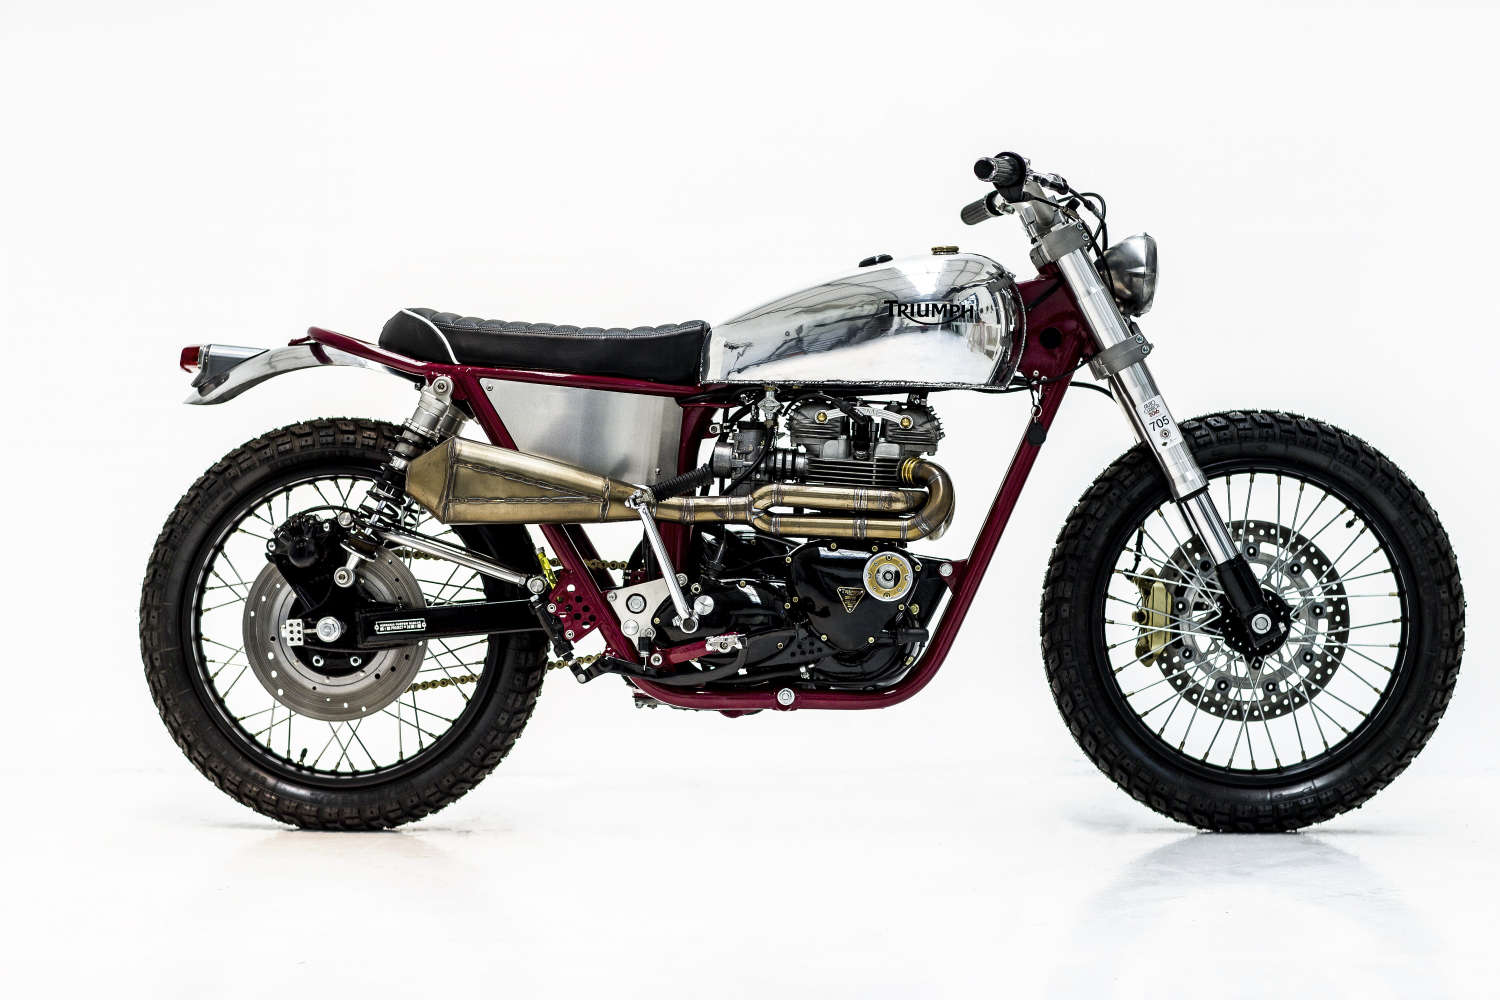 t140 cafe racer Herenciacustomgarage